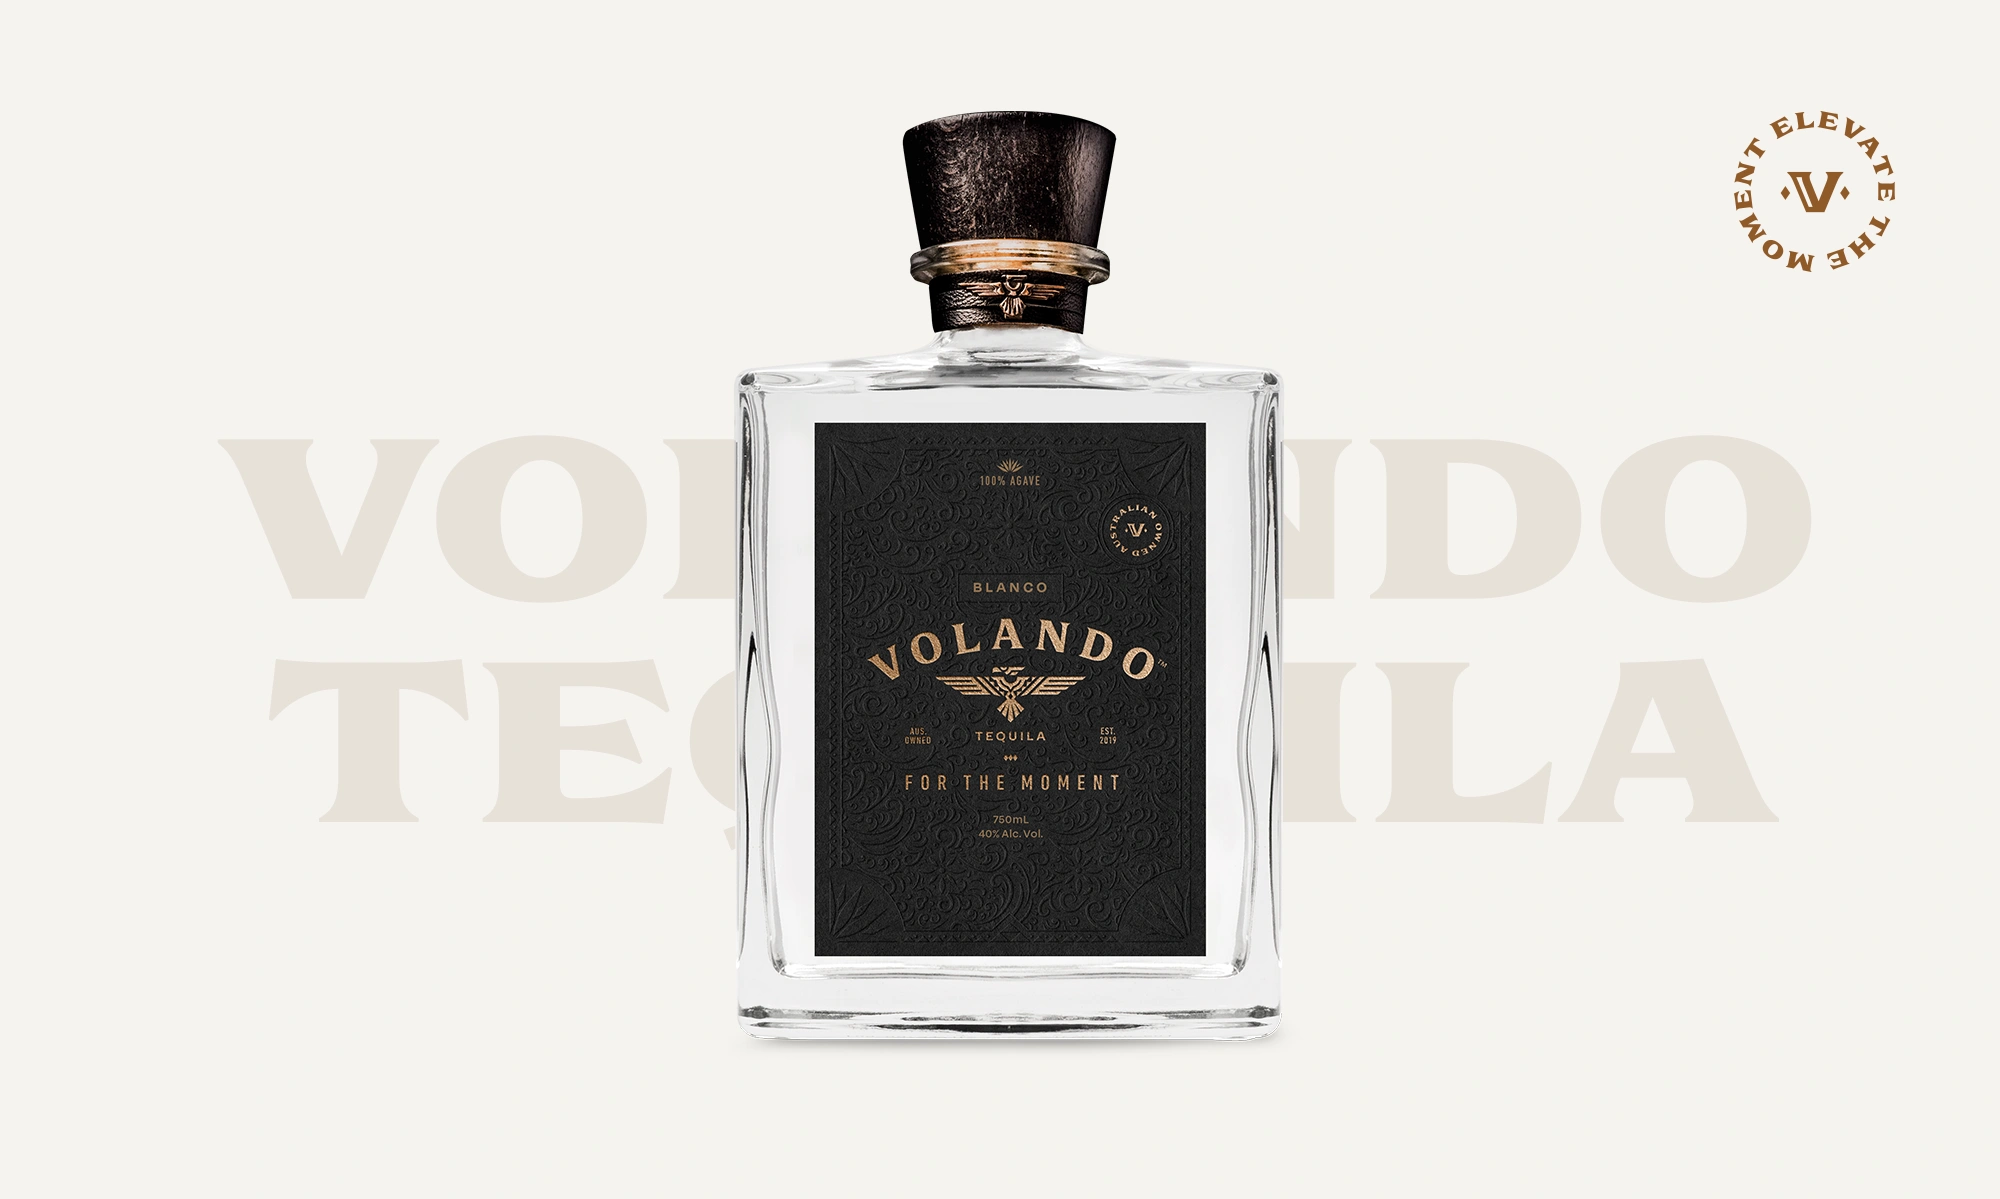 Volando Tequila product packaging design by Kaliber Studio